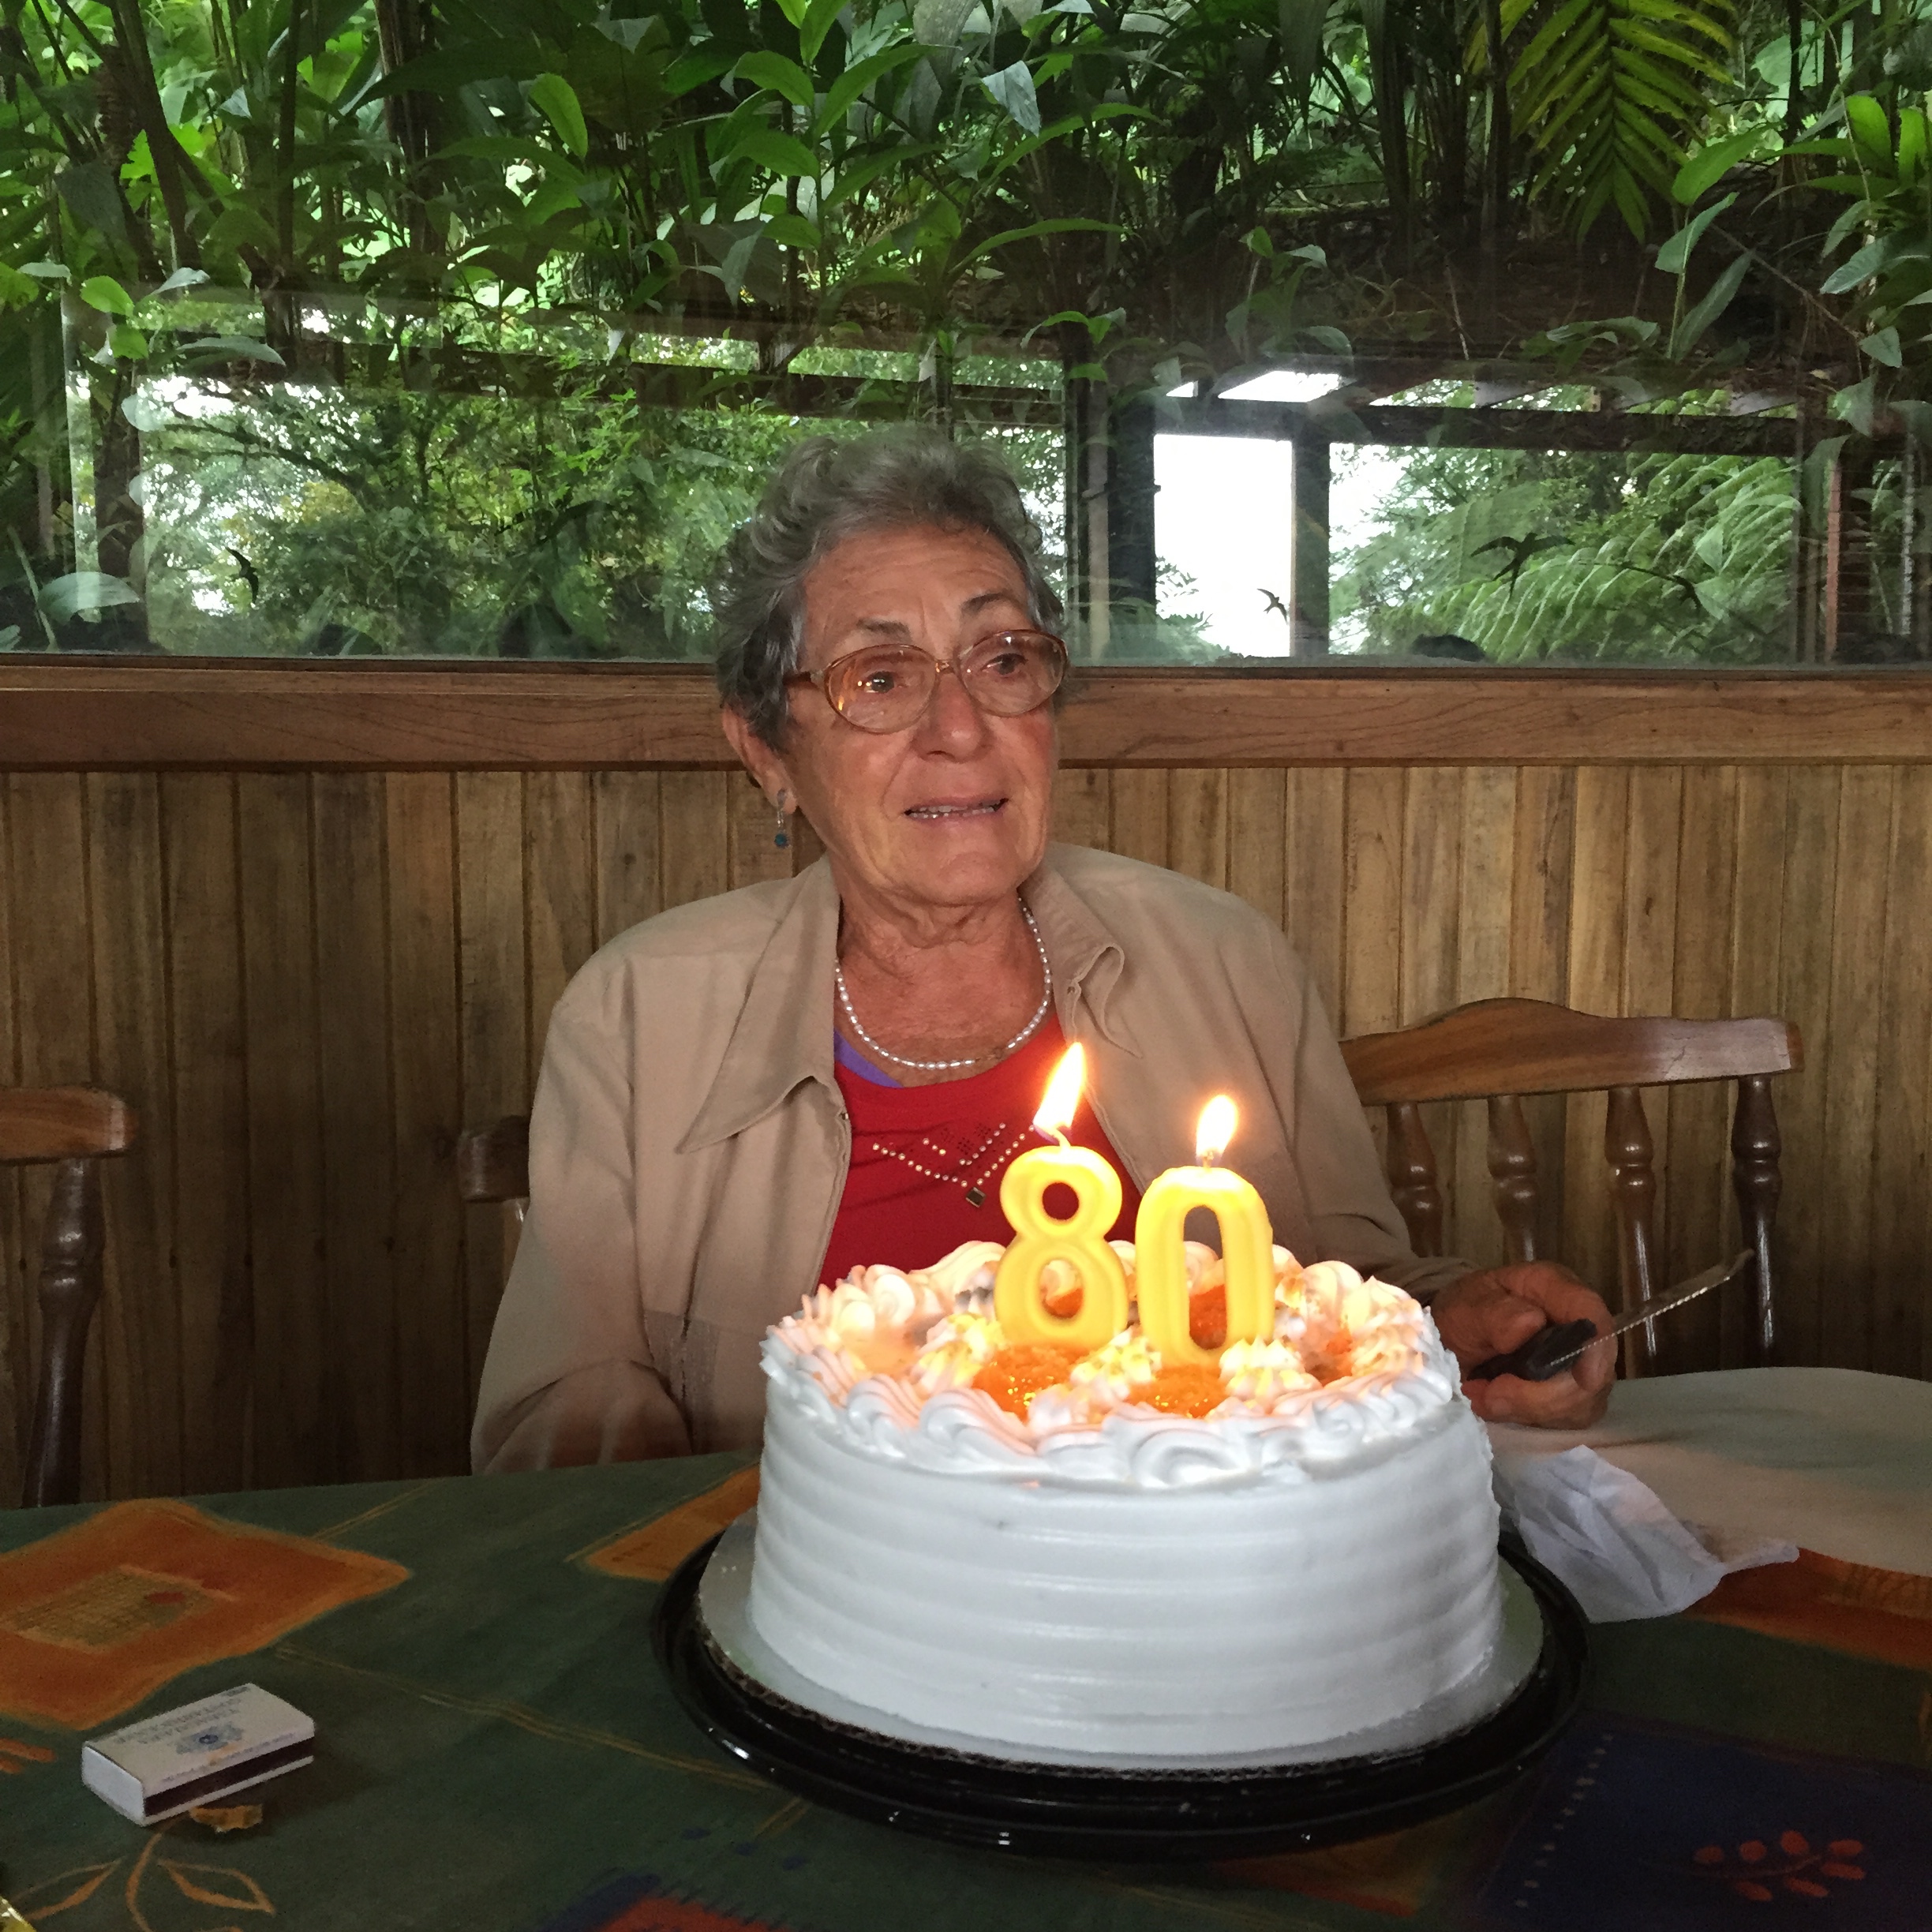 The USAC family celebrated Delia Maria's 80th birthday. After she blew out her candles, she began to get teary-eyed and then so did everyone else at our table!